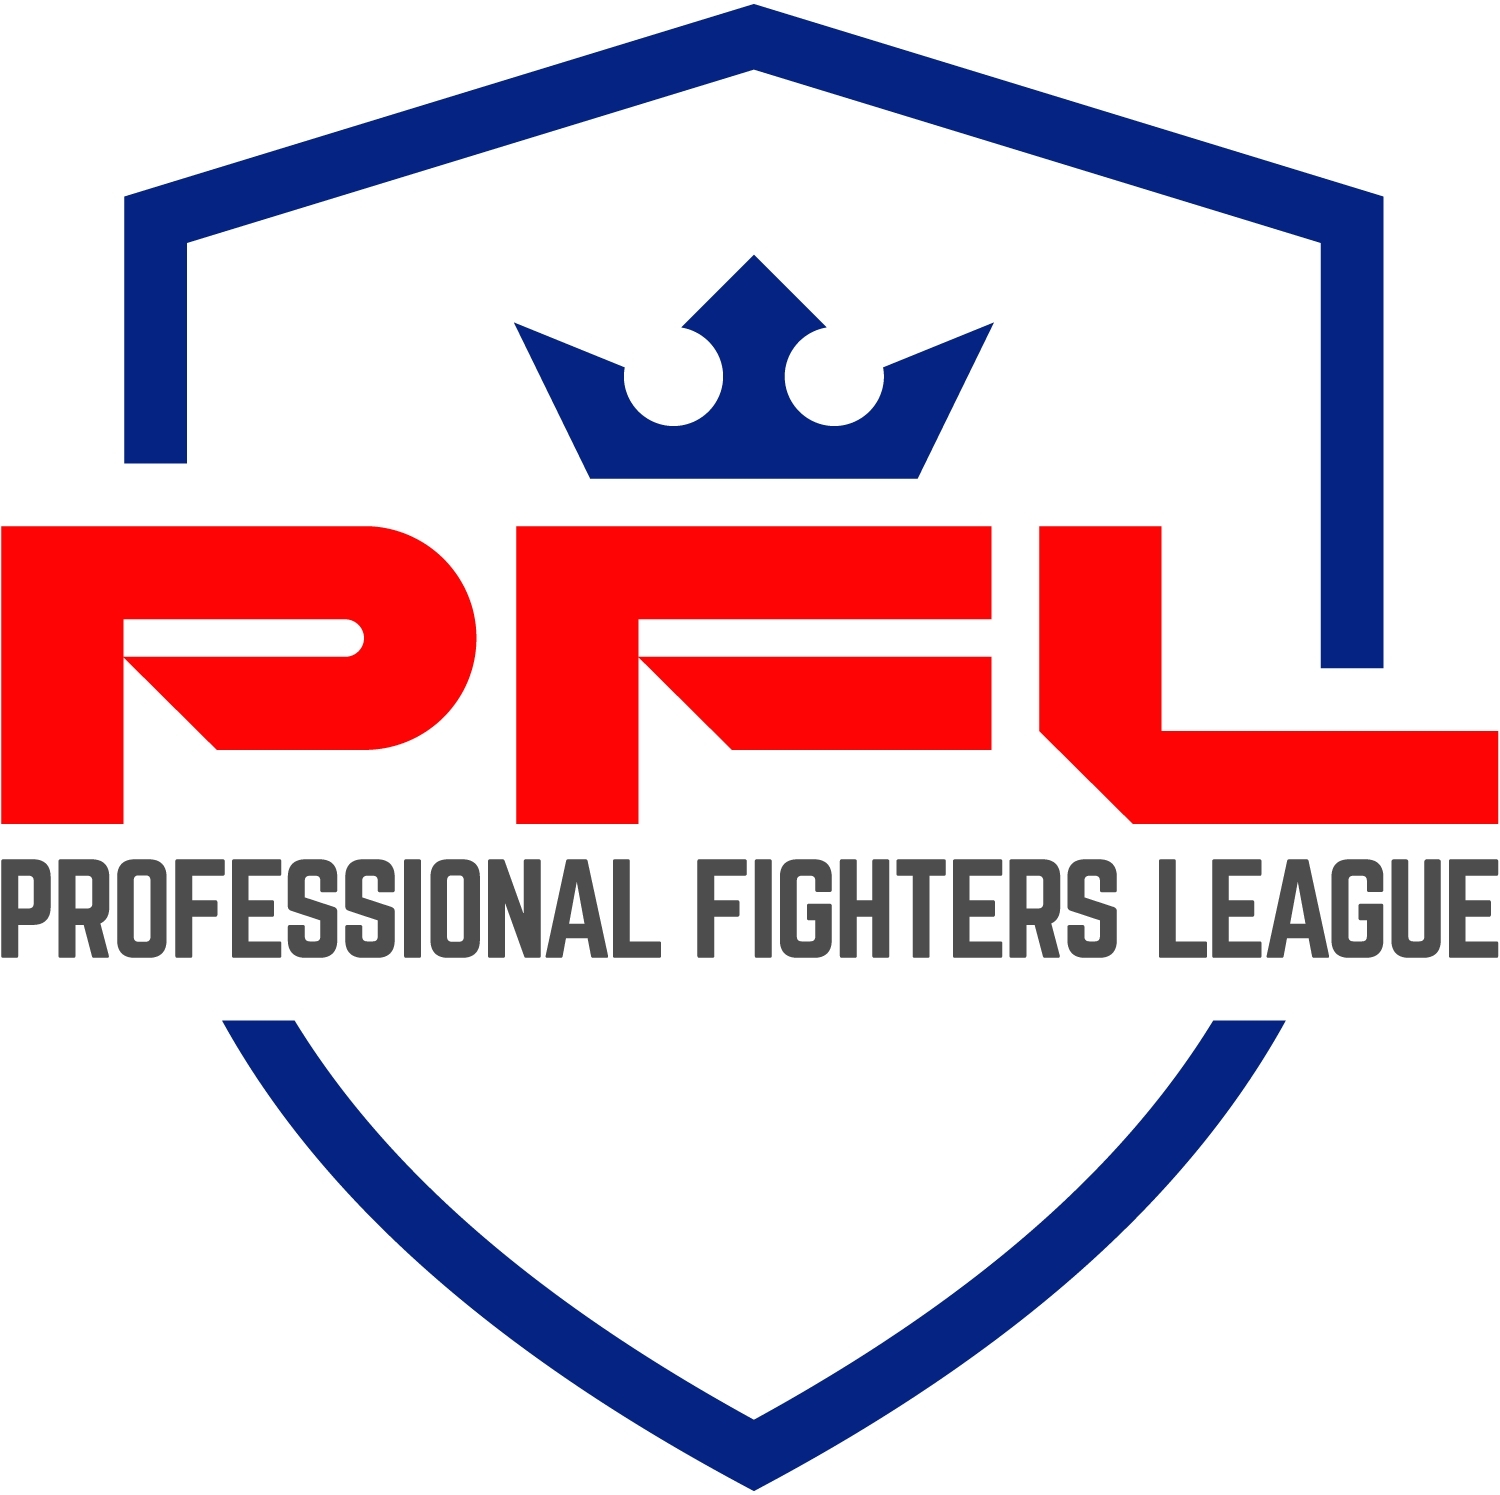 Professional Fighters League (PFL) WorldClass Fighters Gear up for